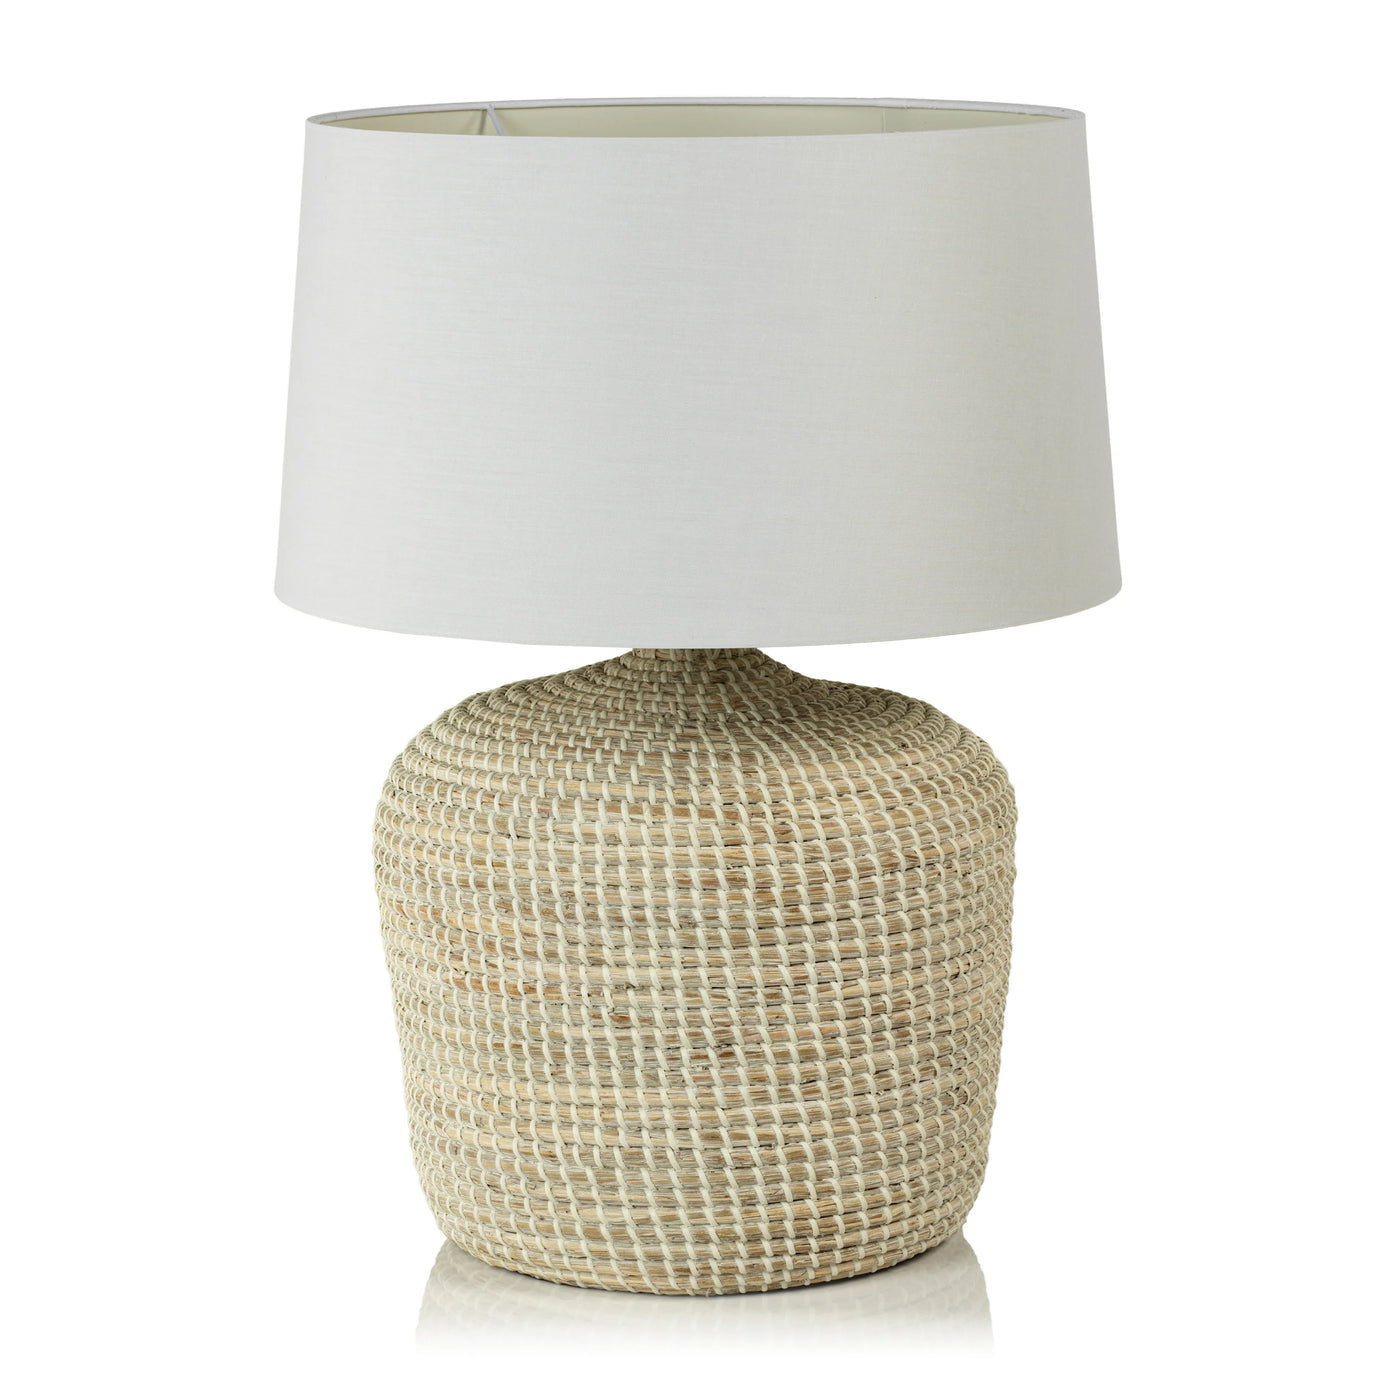 TABLE LAMP SEAGRASS